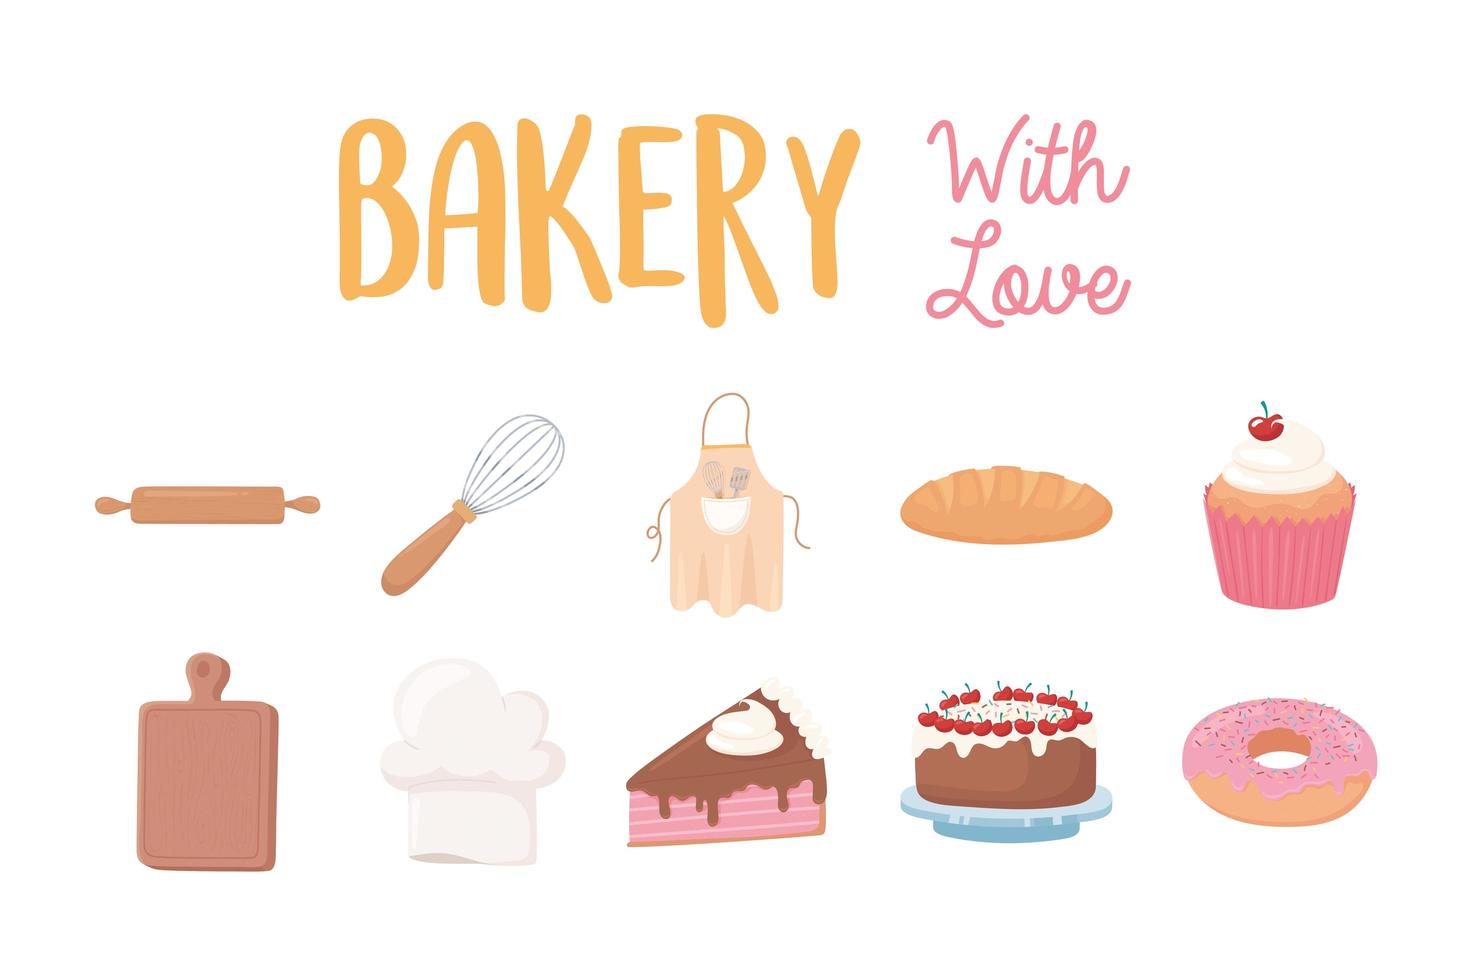 bakery with love icons donut cake cupcake bread and utensils vector